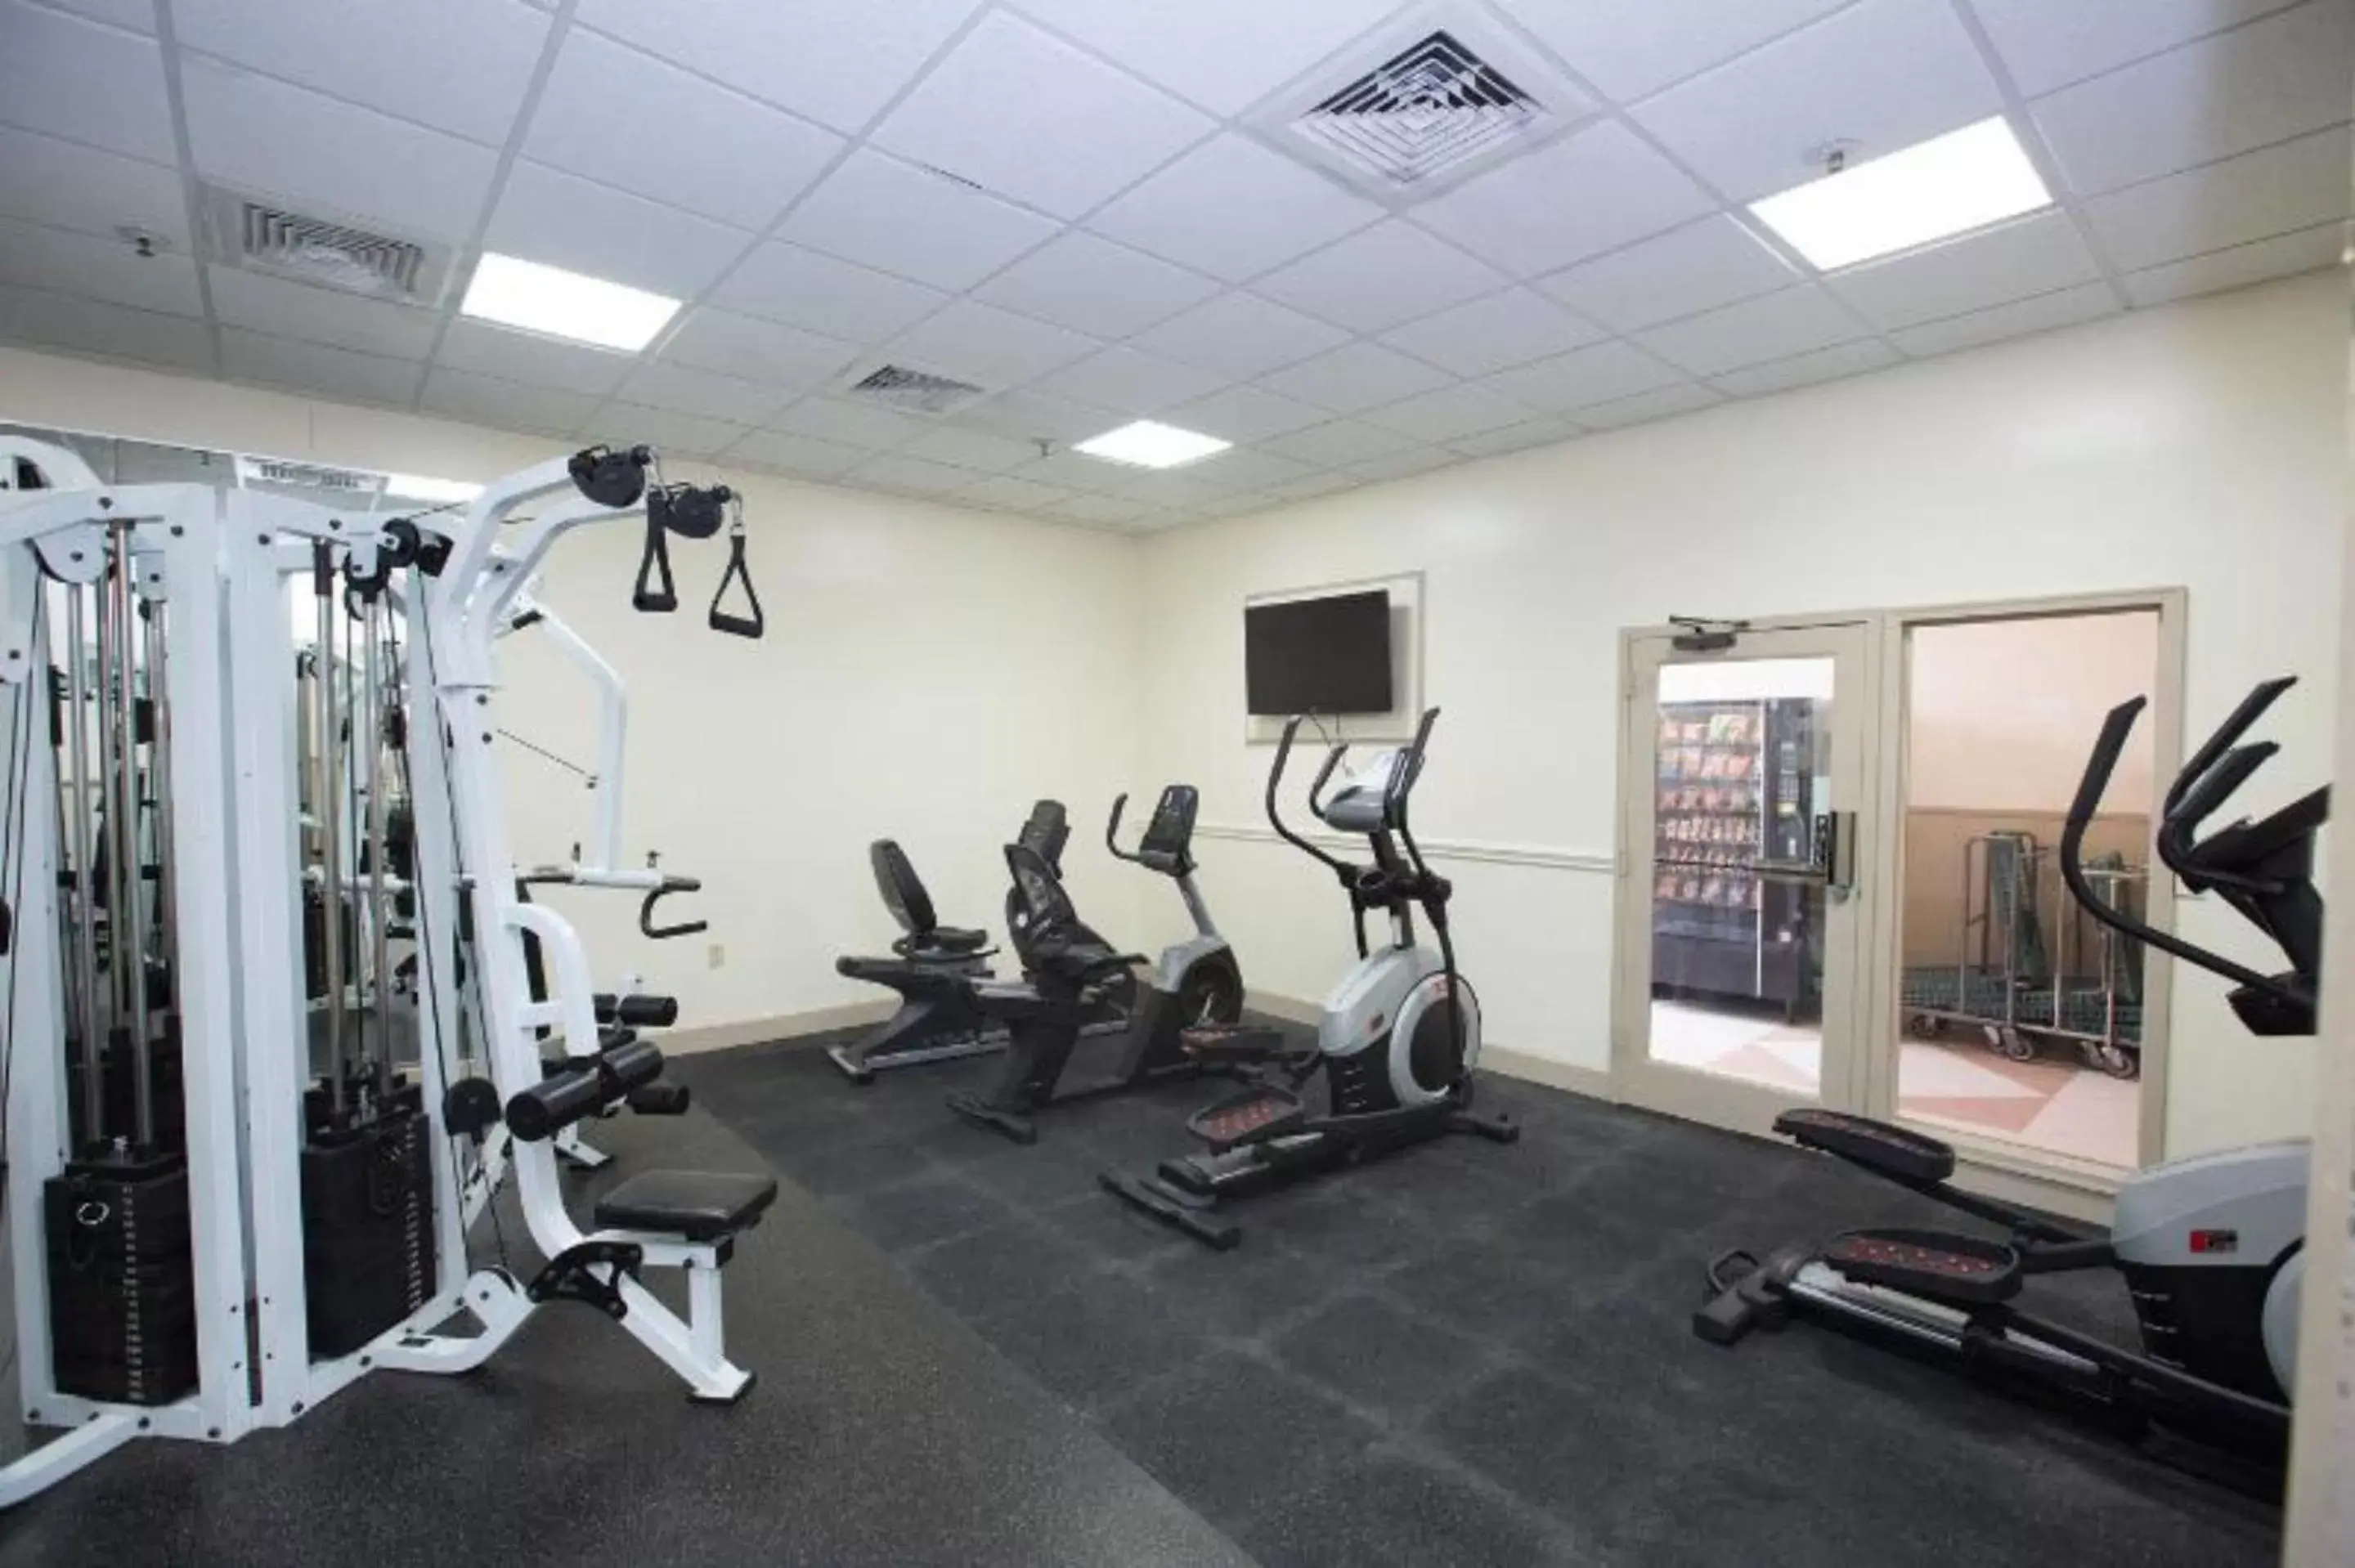 Fitness centre/facilities, Fitness Center/Facilities in Myrtle Beach Resort